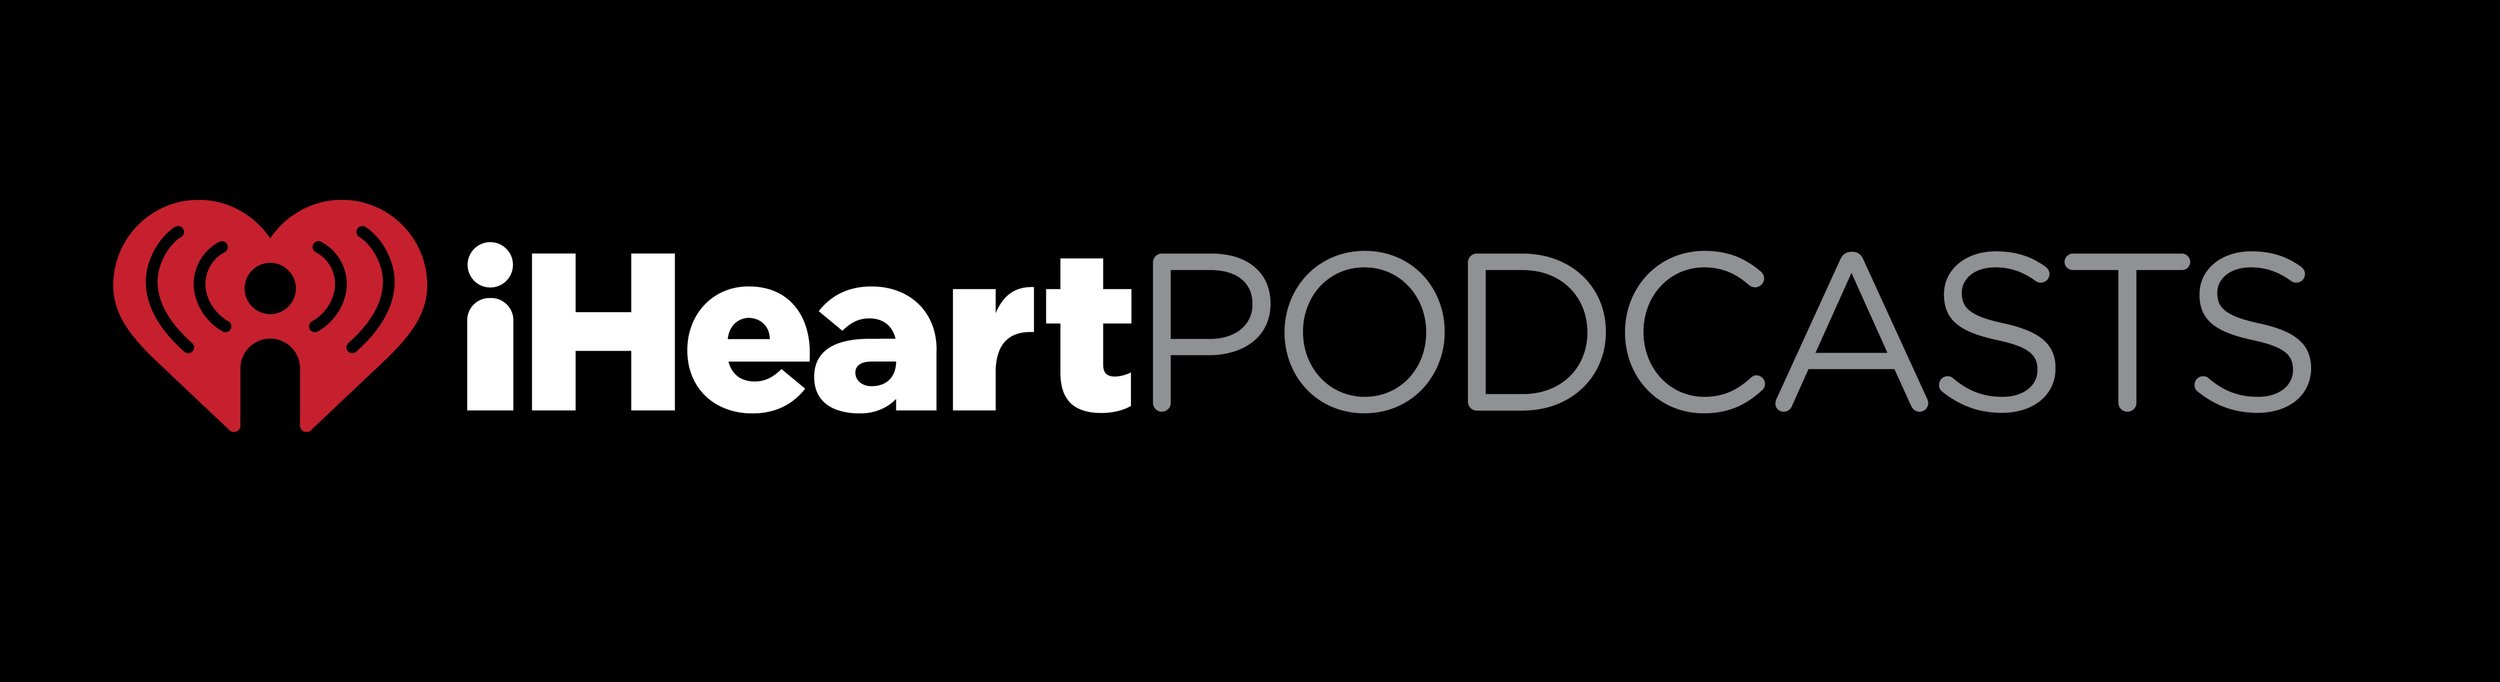 Listen to the ParentTalk Podcast on iHeartPodcasts.